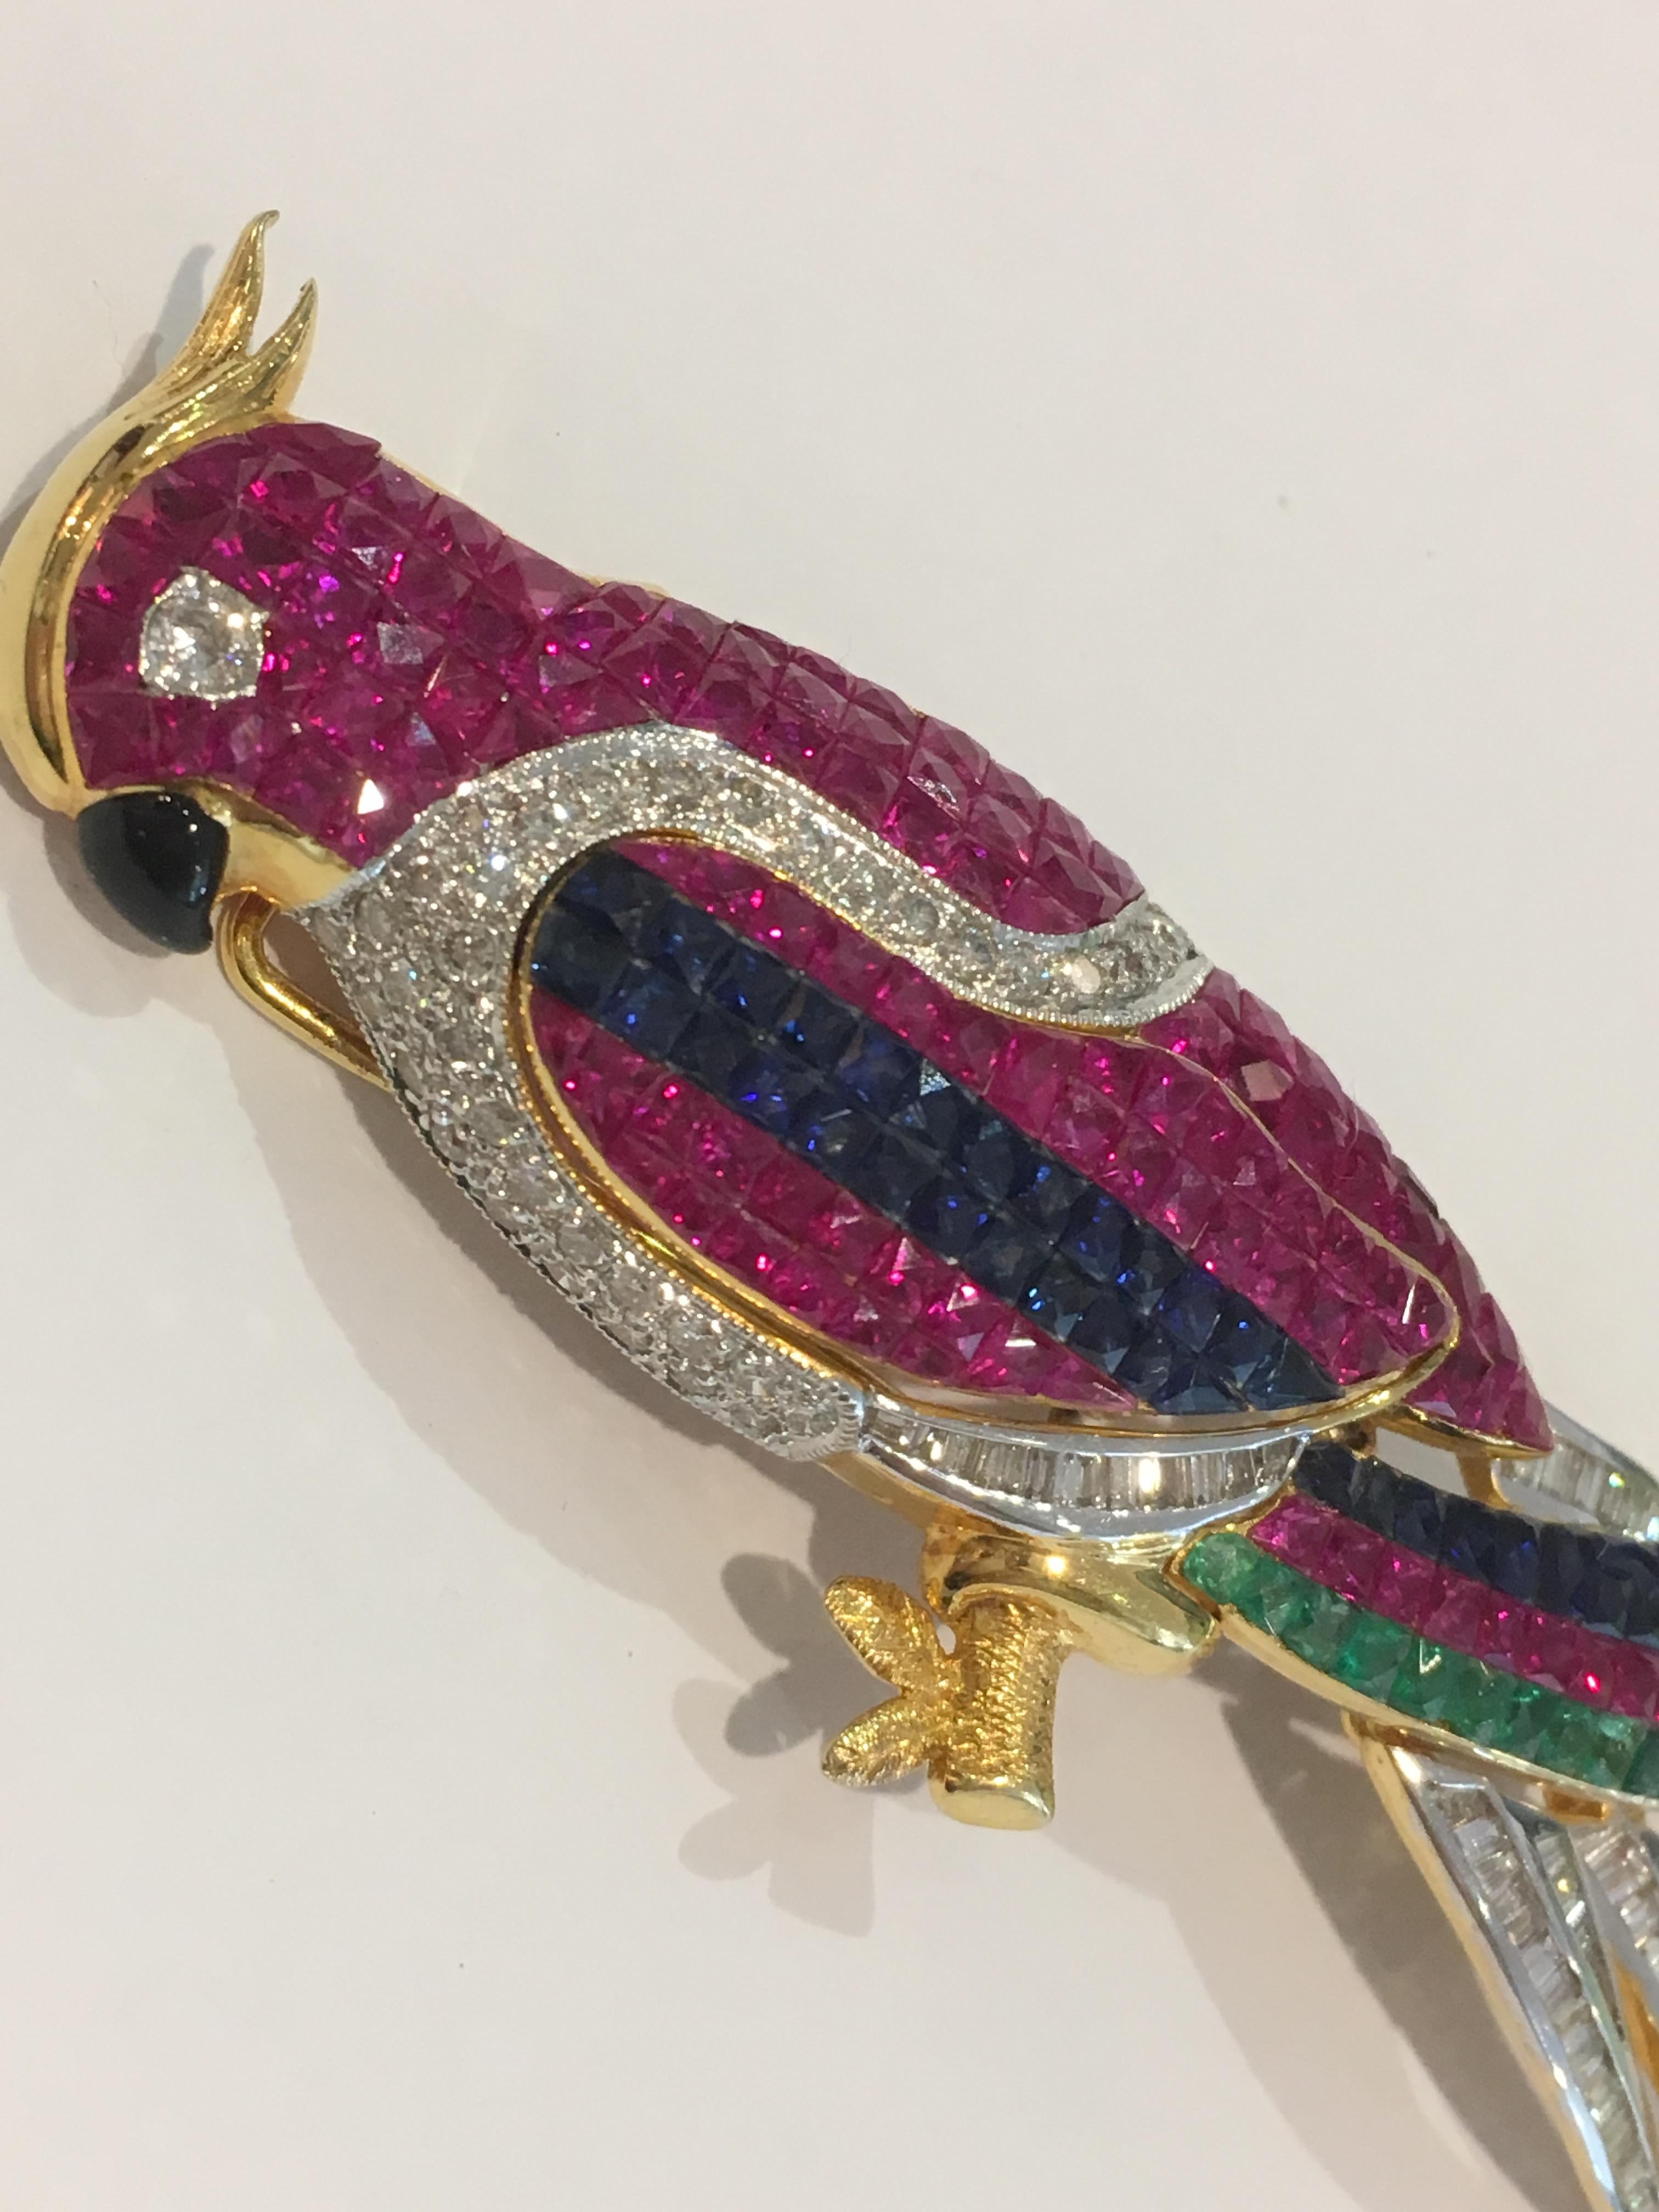 Ladies 18k yellow gold parrot brooch, with rubies, saphires, emeralds and diamonds!

Not stamped 18k but does test 18k

Weighs 20 grams.

There are square invisible set rubies, 3.00 total carats,

1.00 carats blue sapphire,

.50 carats